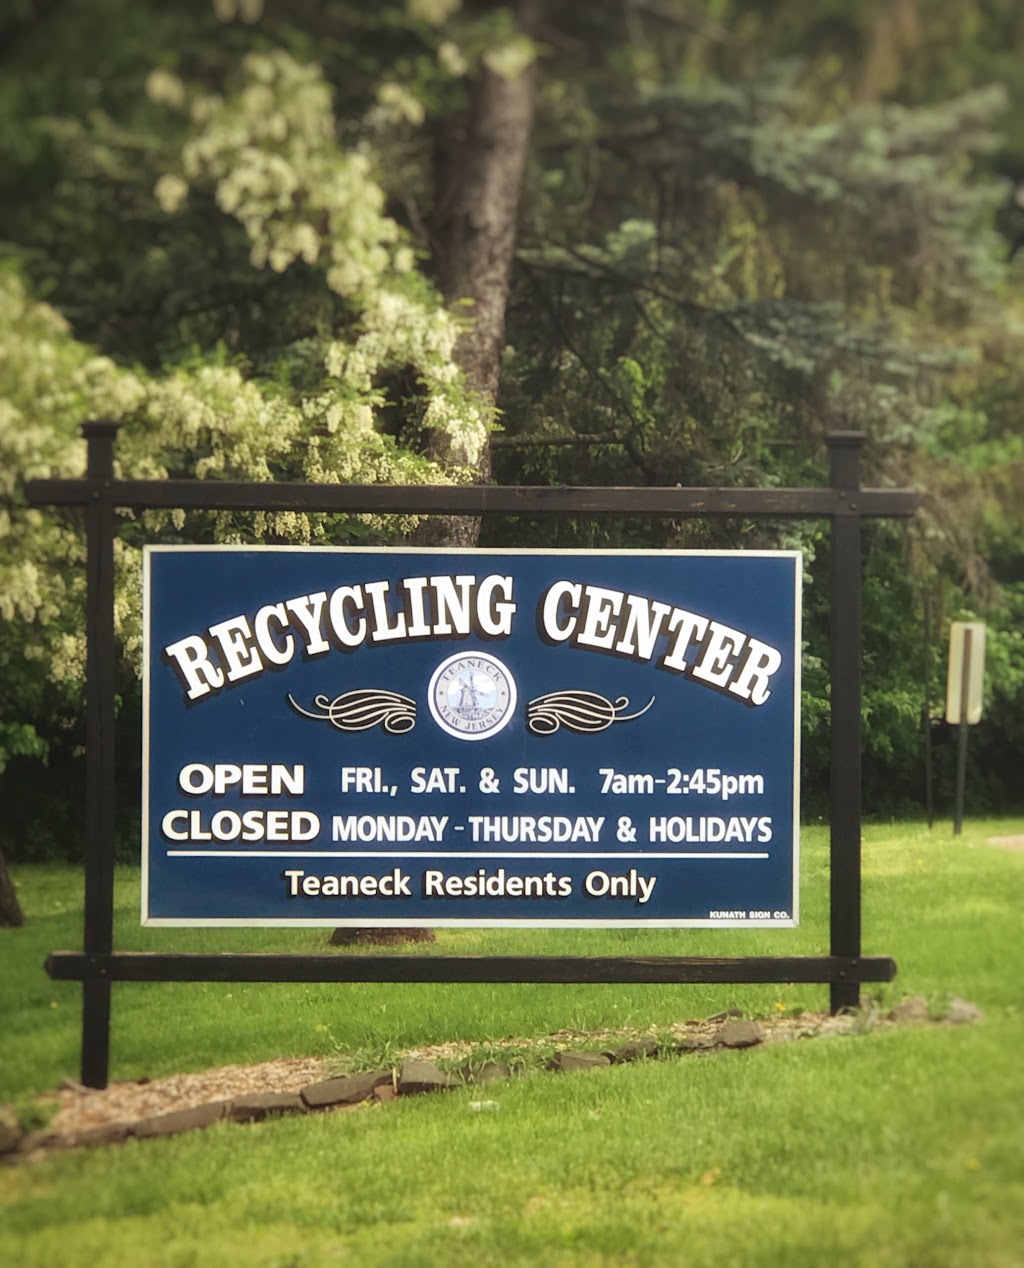 Teaneck Recycling Center | 1600 River Rd, Teaneck, NJ 07666 | Phone: (201) 837-1600 ext. 1946